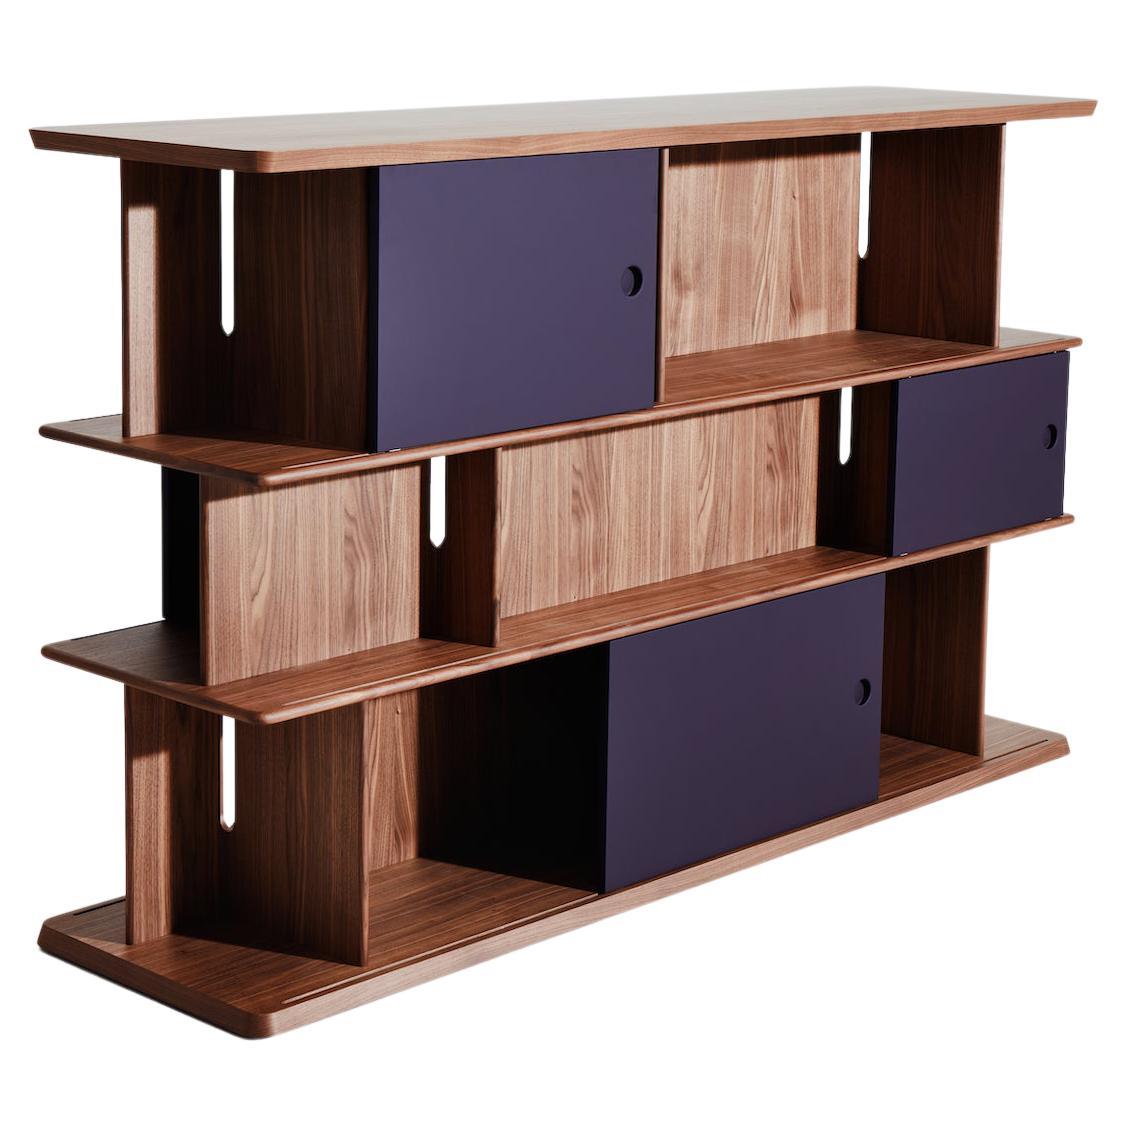 For La Manufacture, Neri&Hu have designed a range of bookcases with sliding panels, as part of their ‘Intersection ’collection celebrating monastery life. The use of natural or stained wood panels for the structure gives this range of bookcases a